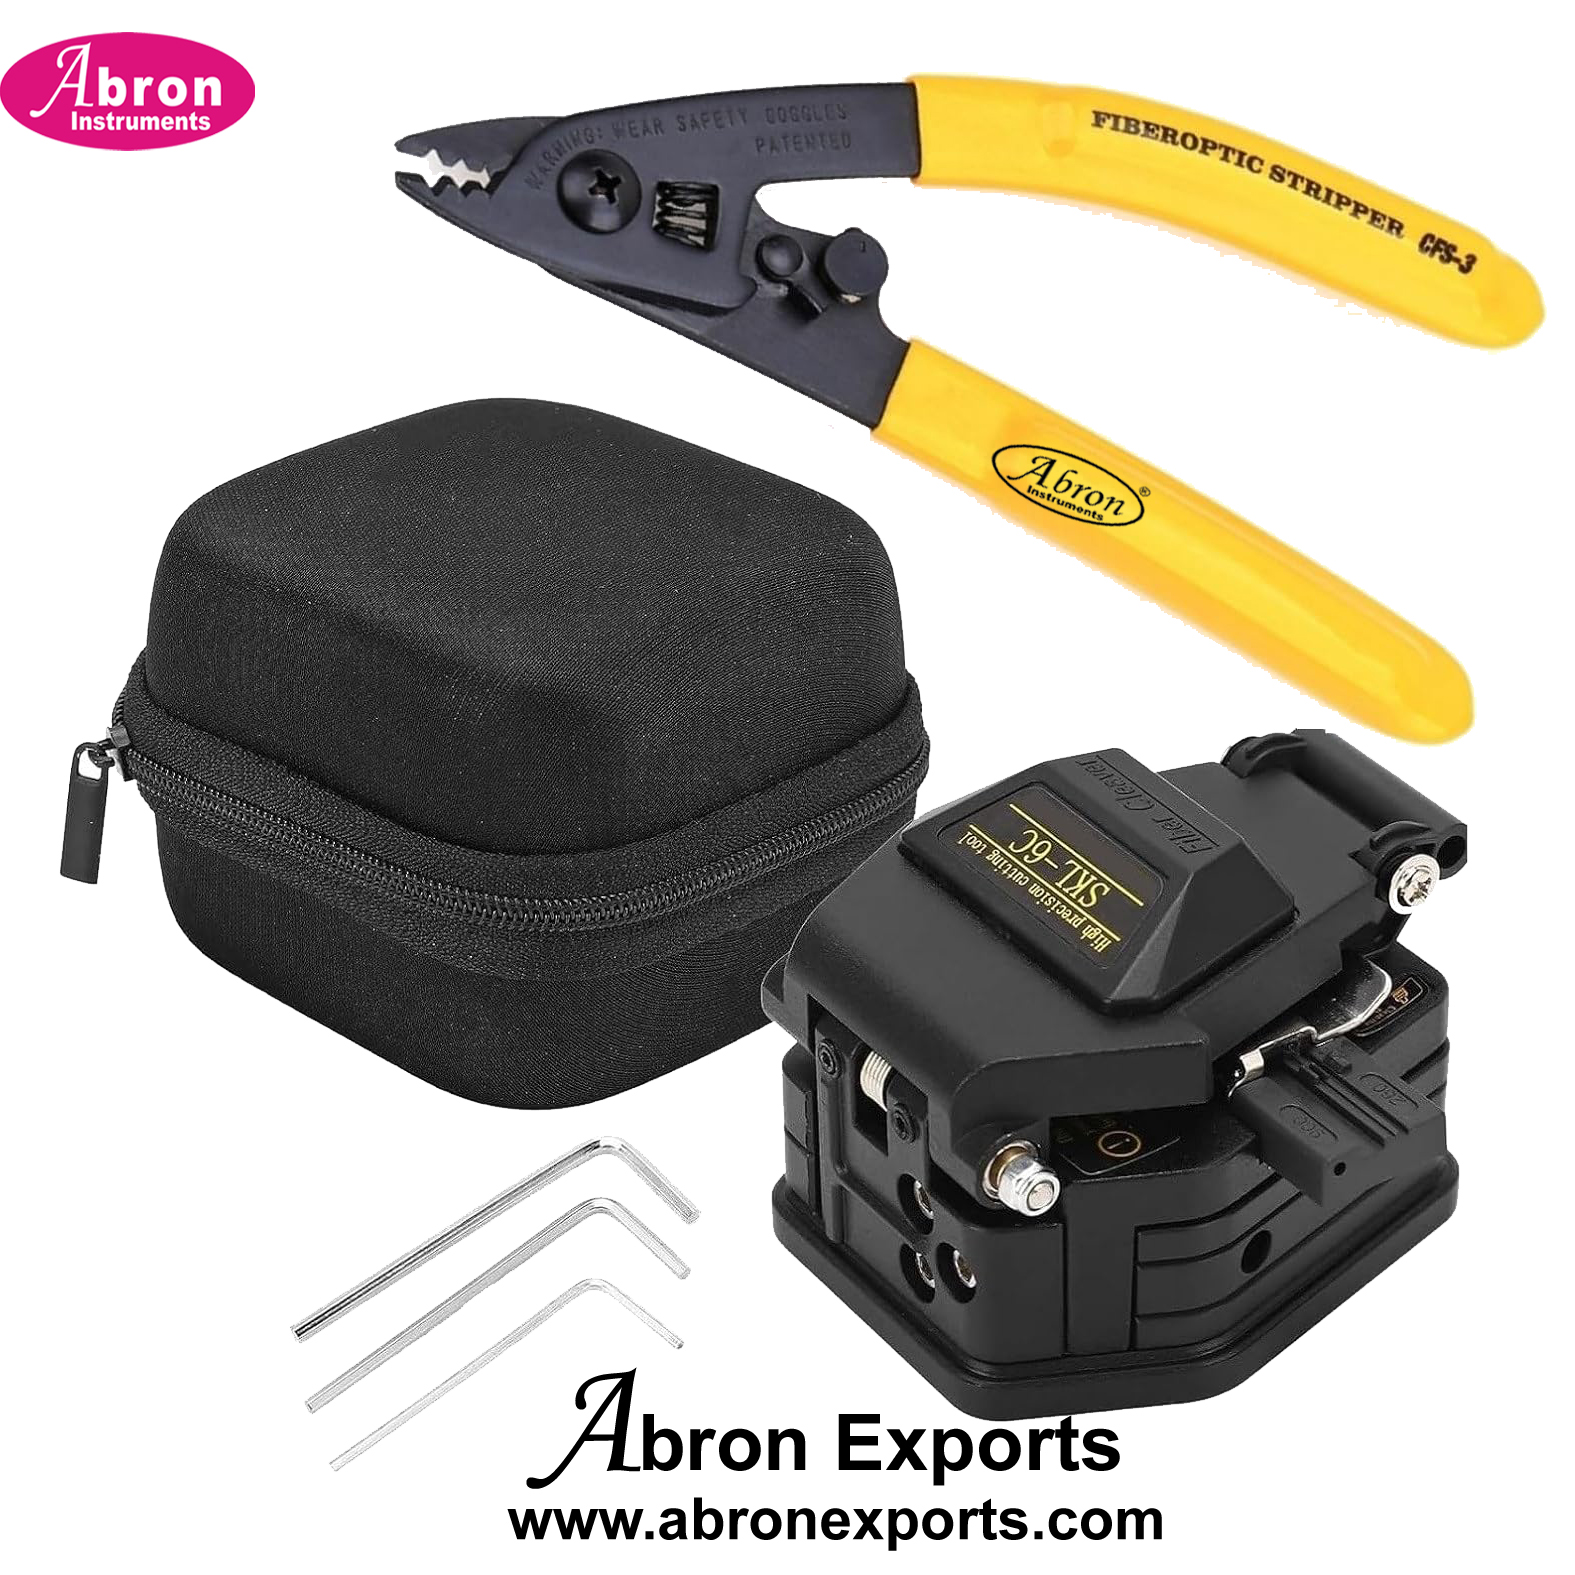 Fiber Cleaver Cutter Ftth Skl-6c High Precision Fiber Optic Cleaver with 3 Hole Stripper Upgraded for Stripping Abron AE-1403CL 